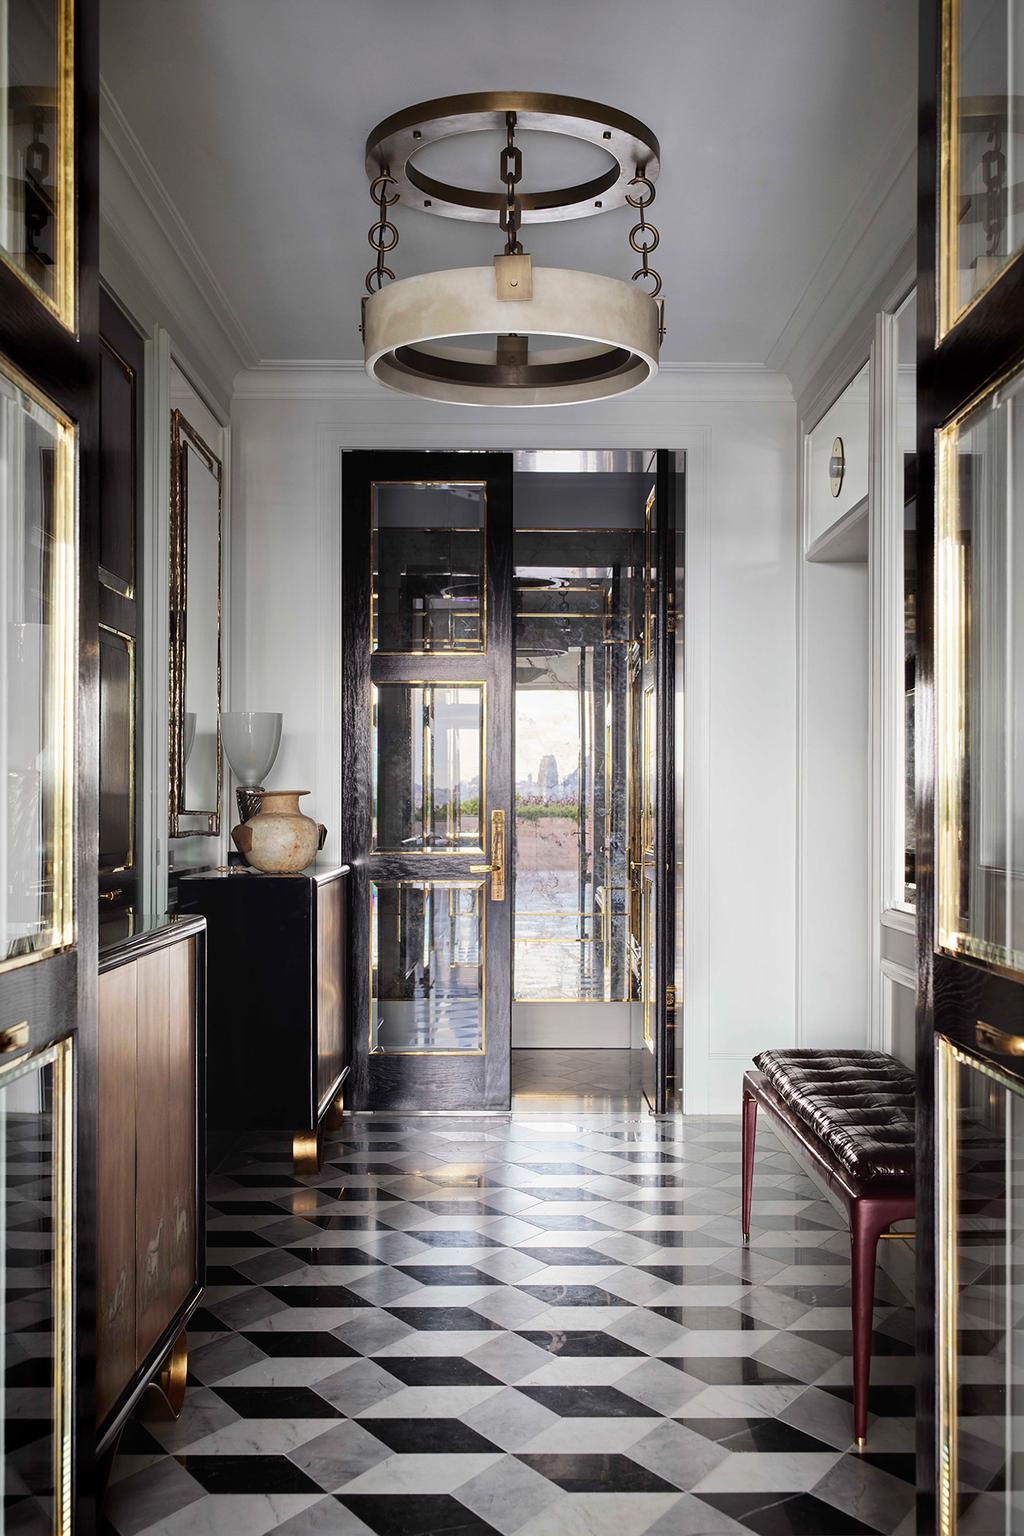 Lavish entry in black and gold tones